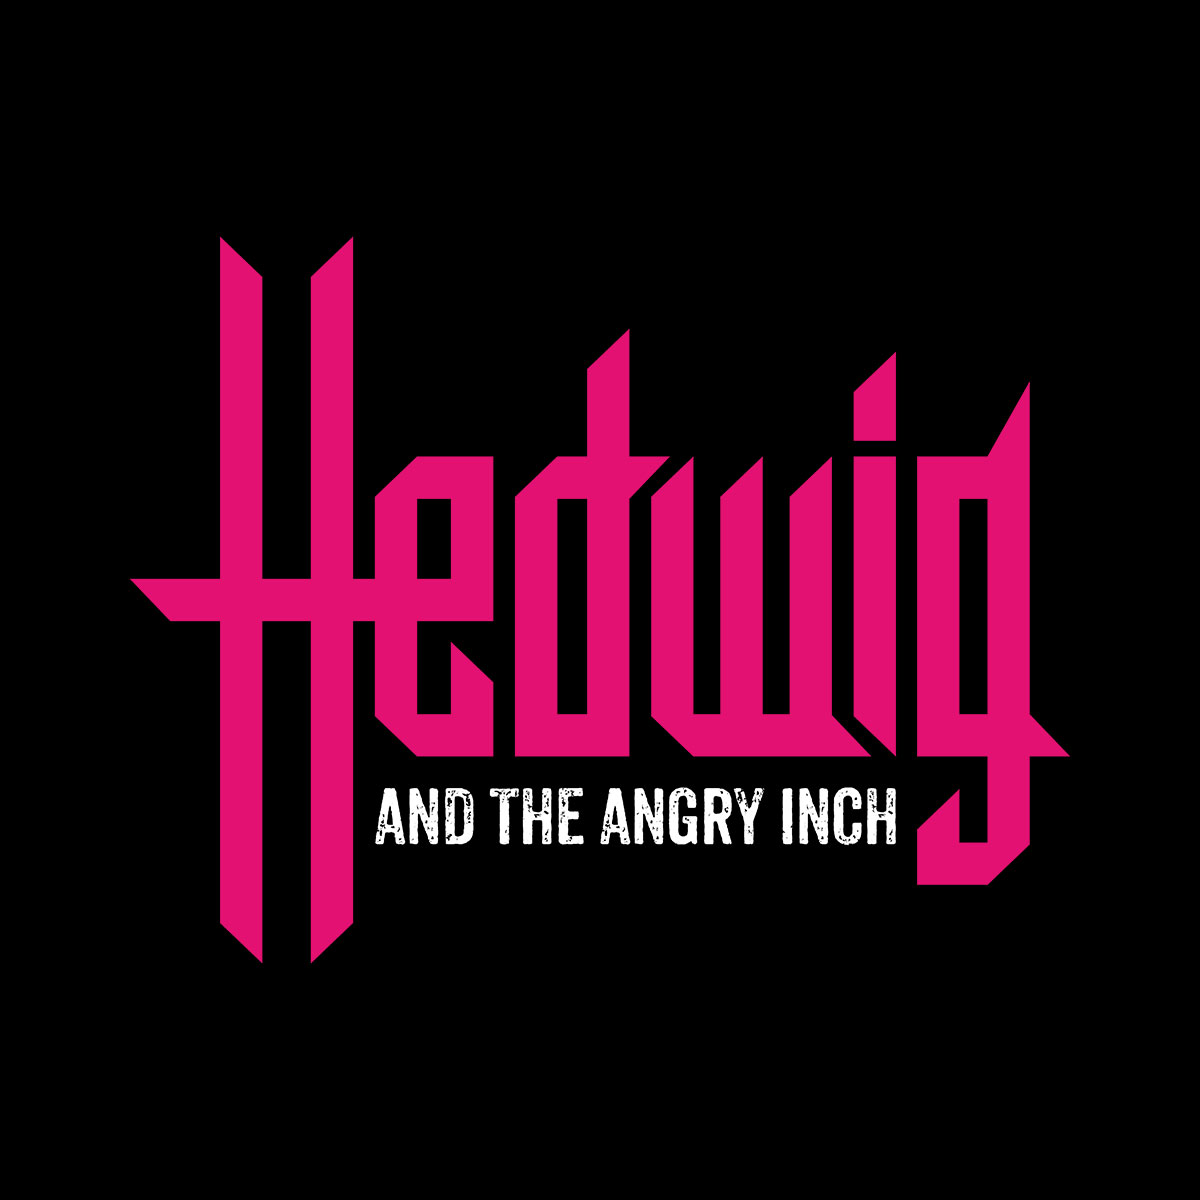 Hedwig and the Angry Inch Logo Pack